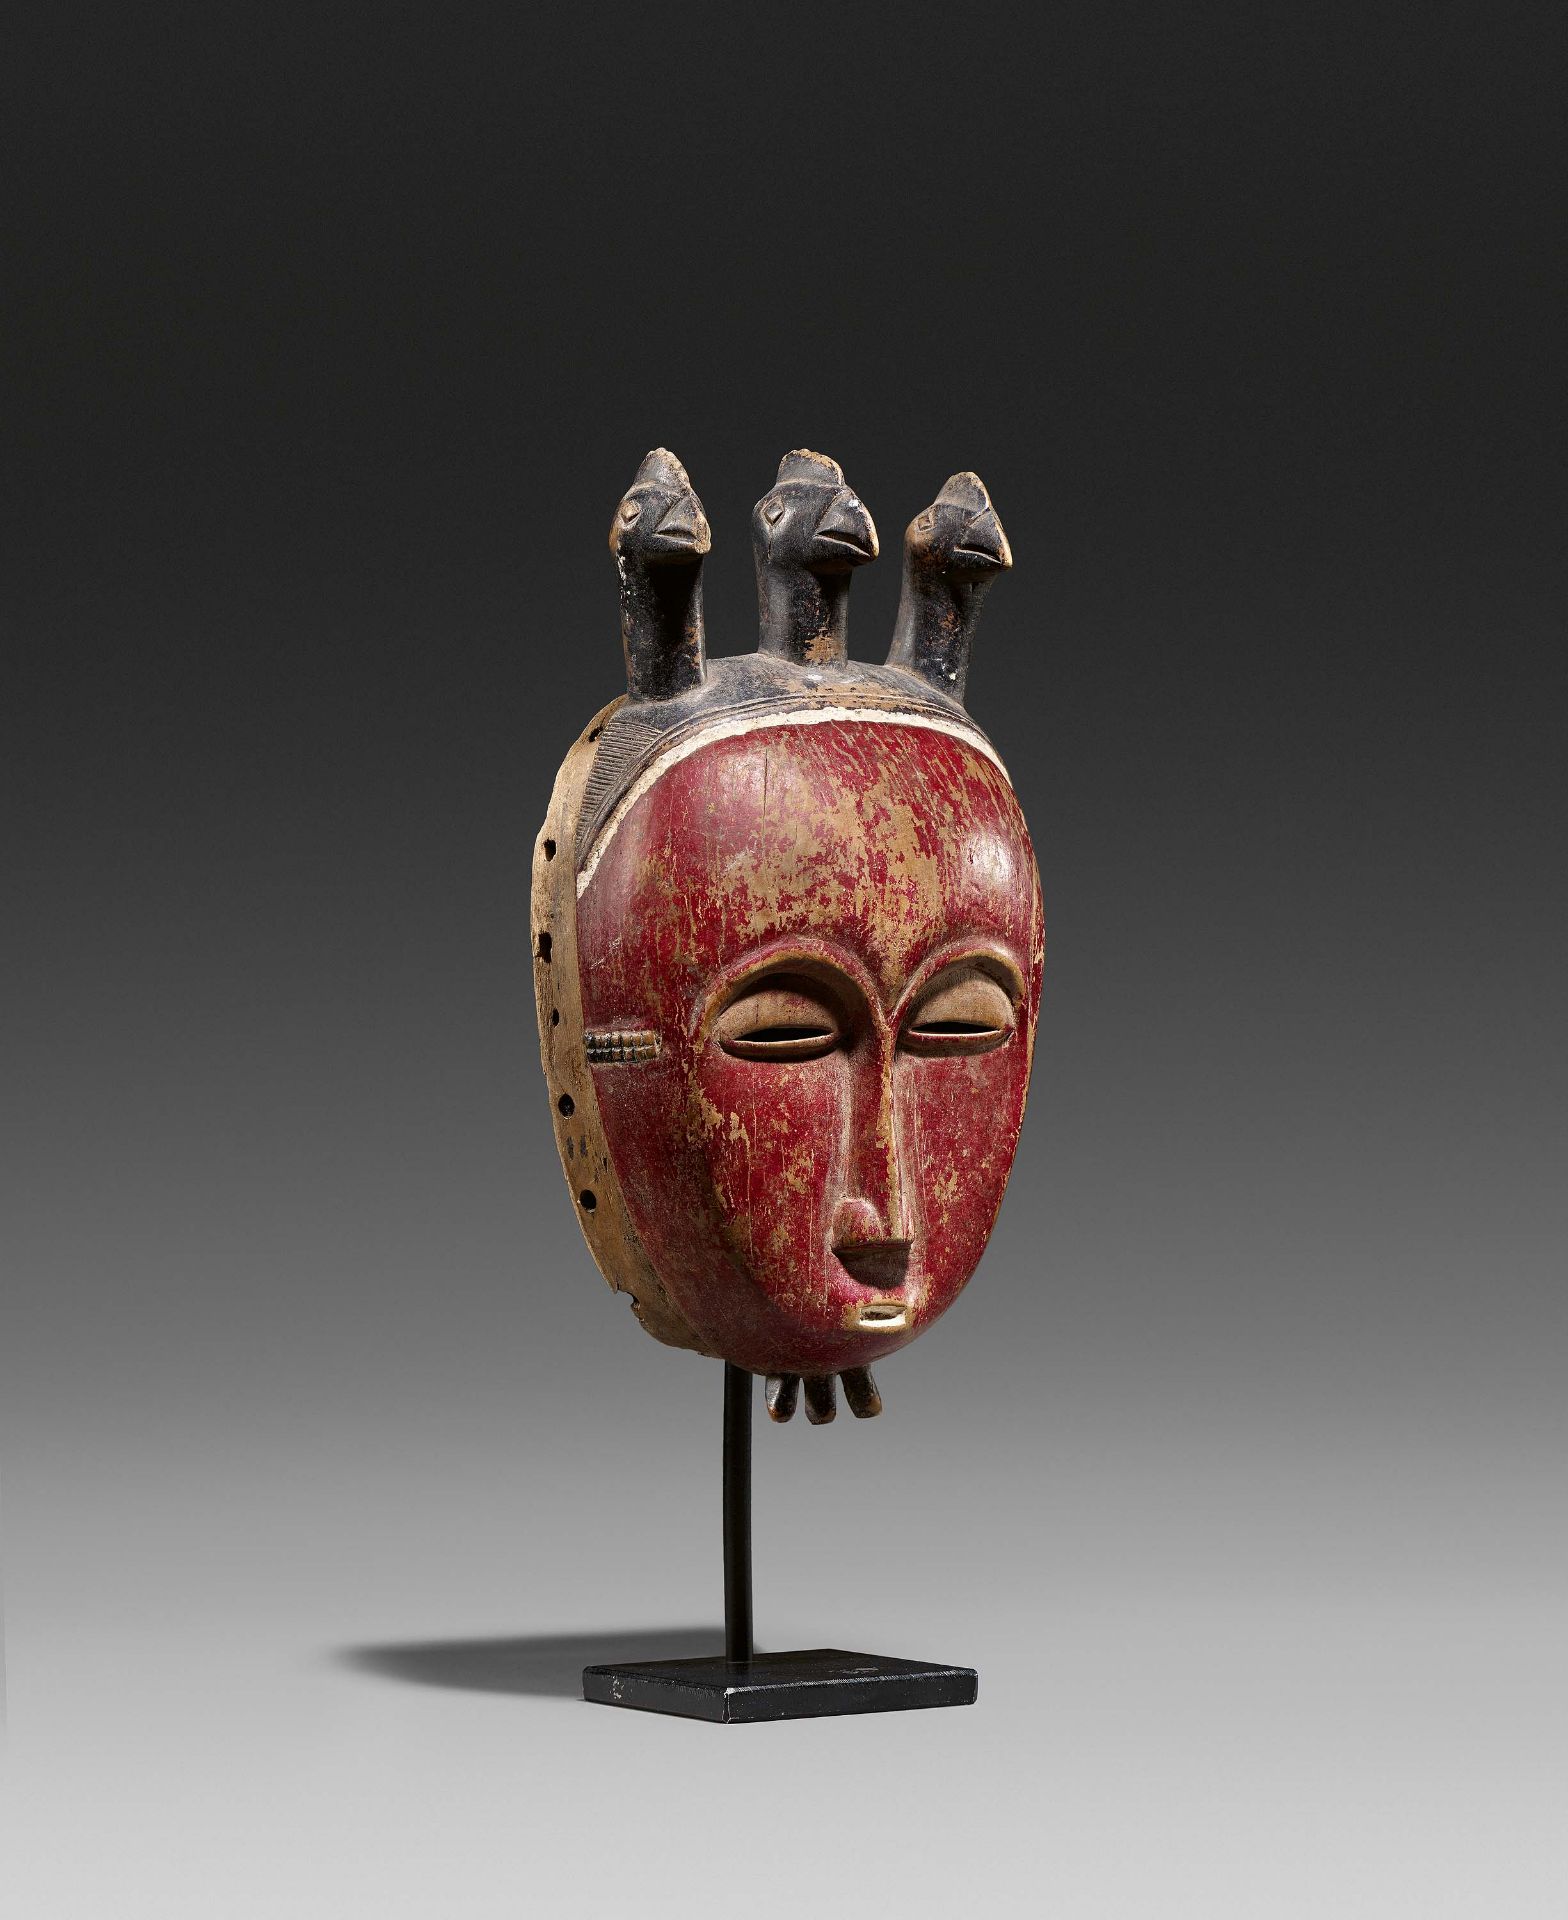 BAULE, Ivory Coast. Mask. Wood, red painted decoration. 26 x 14 x 8cm. Metal stand (24 x 11,5 x 8,